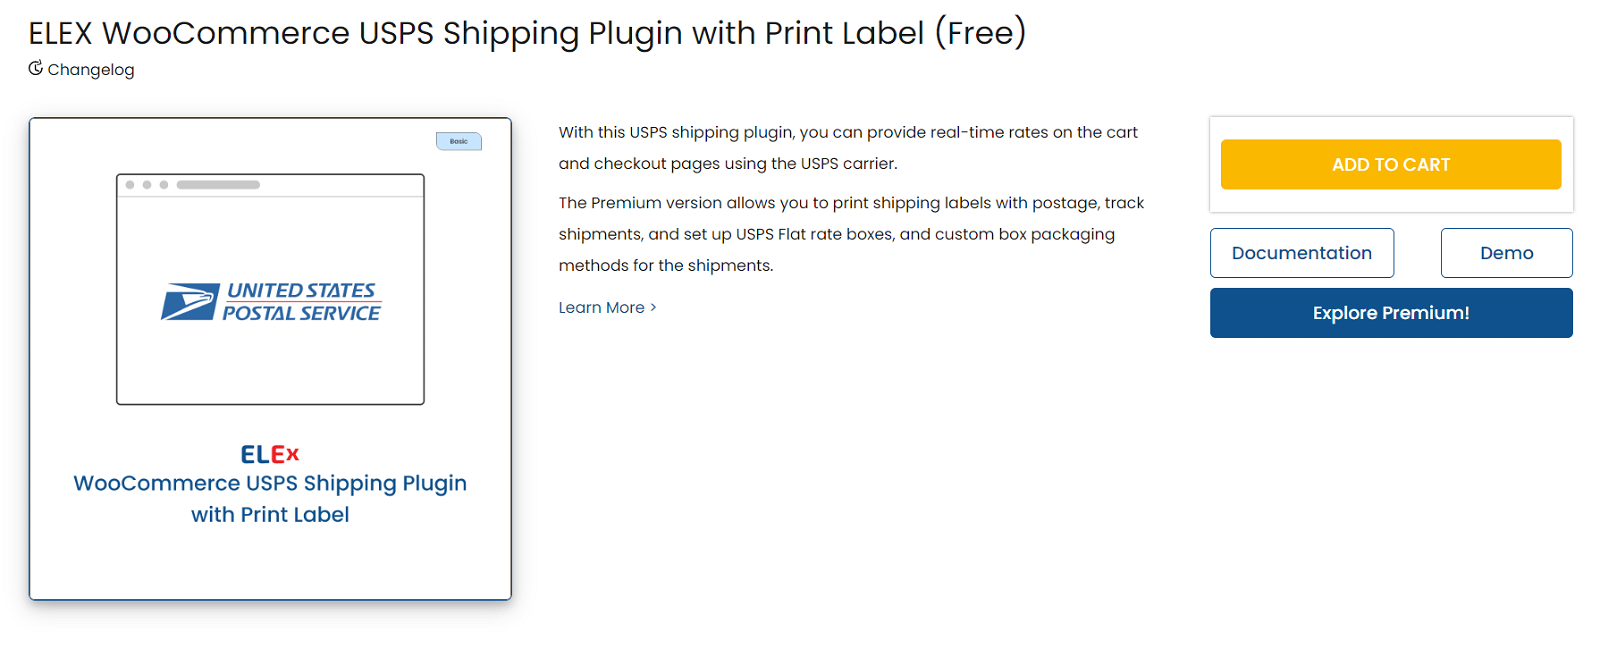 ELEX WooCommerce USPS Shipping Plugin with Print Label